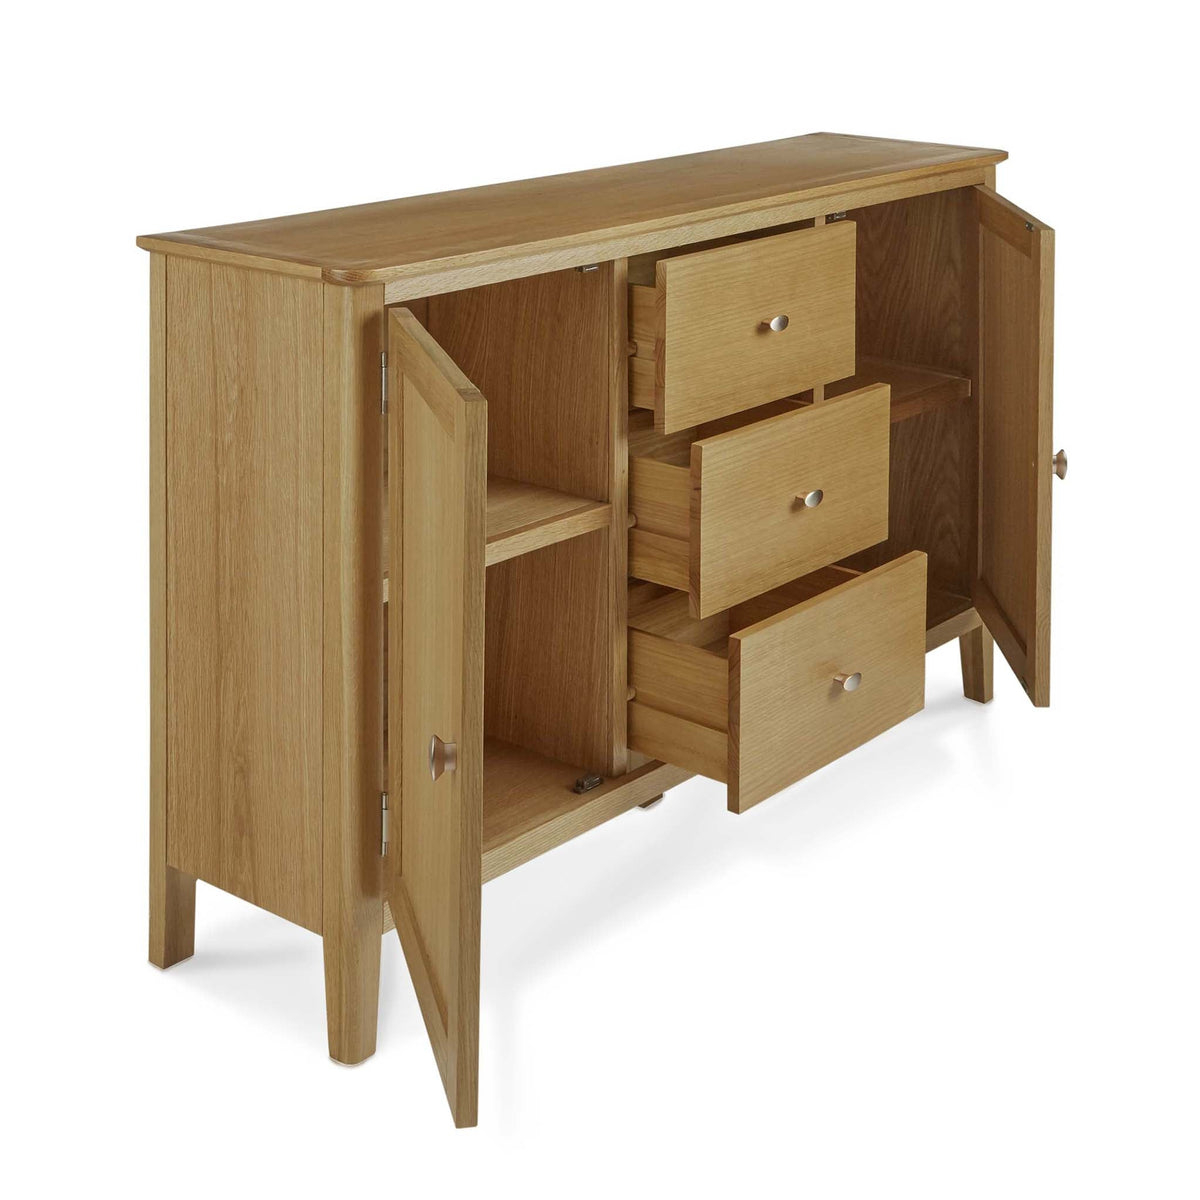 Alba Oak Large Sideboard - Side view with cupboards and drawers open